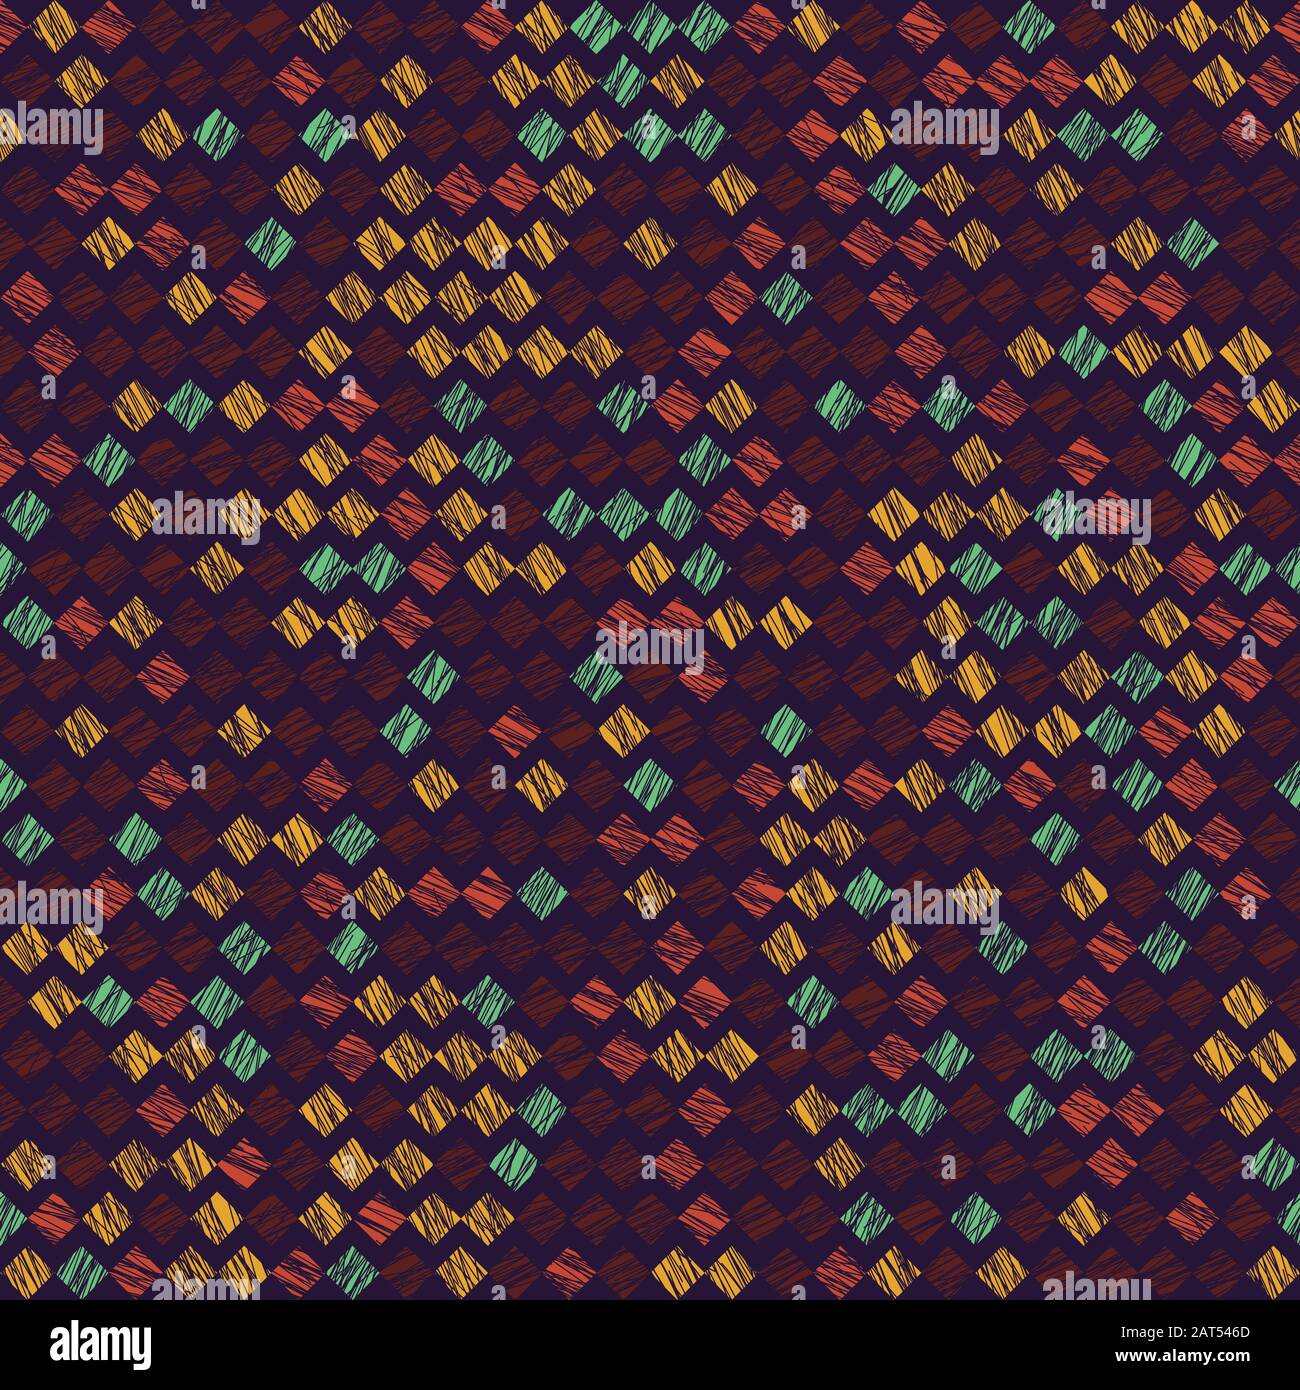 Rhombus pattern. Scatter. Noise backdrop. Seamless pattern. Variety of rhombuses in bright colors. Colorful background for decoration or printing on f Stock Vector